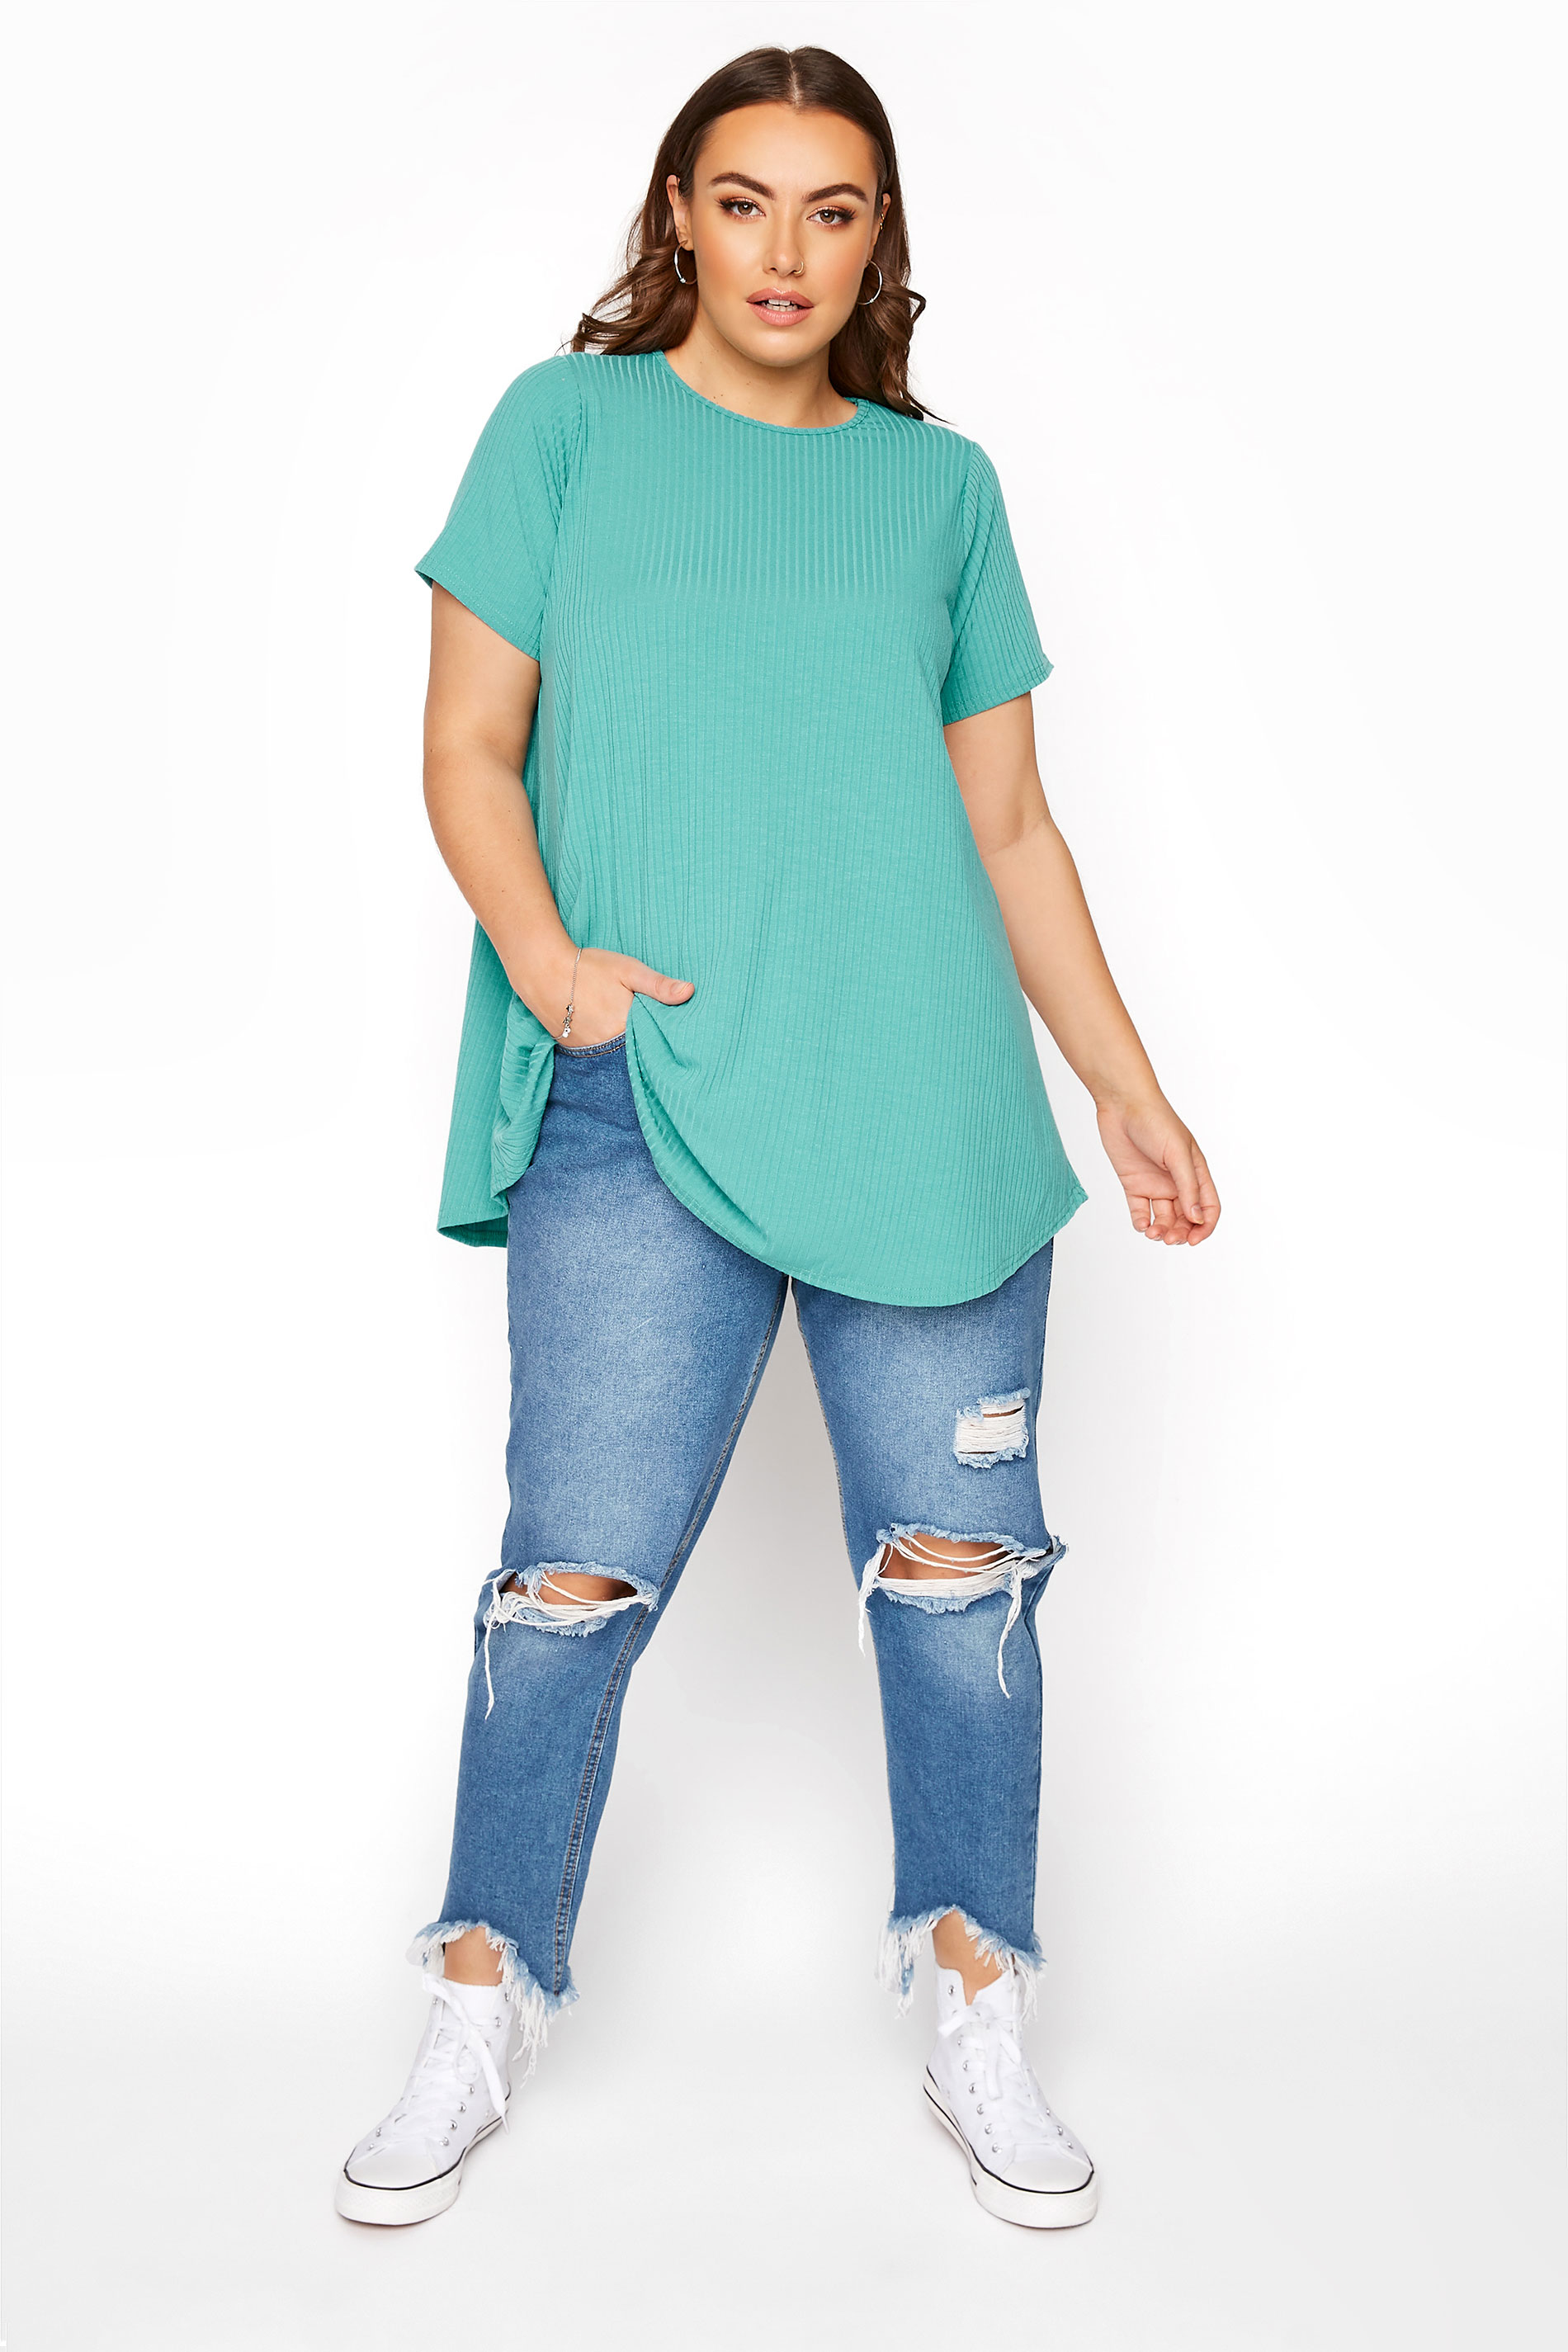 Grande taille  Tops Grande taille  Tops Jersey | LIMITED COLLECTION - T-Shirt Vert Nervuré en Jersey - IV31148